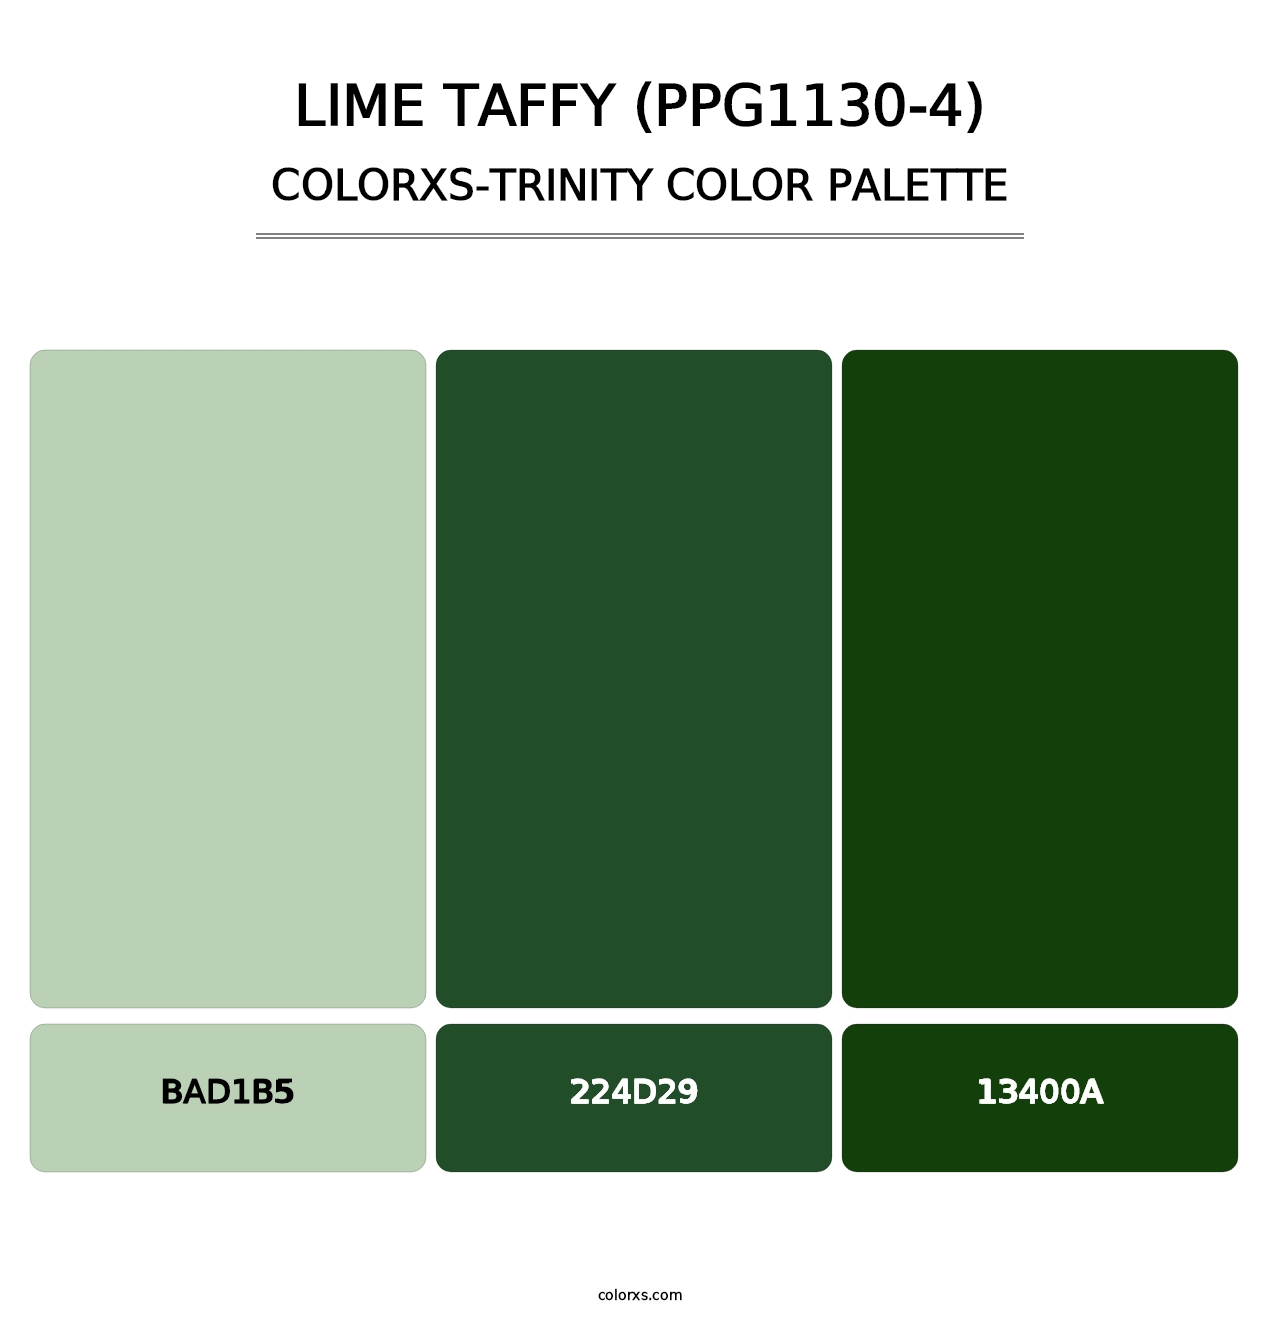 Lime Taffy (PPG1130-4) - Colorxs Trinity Palette